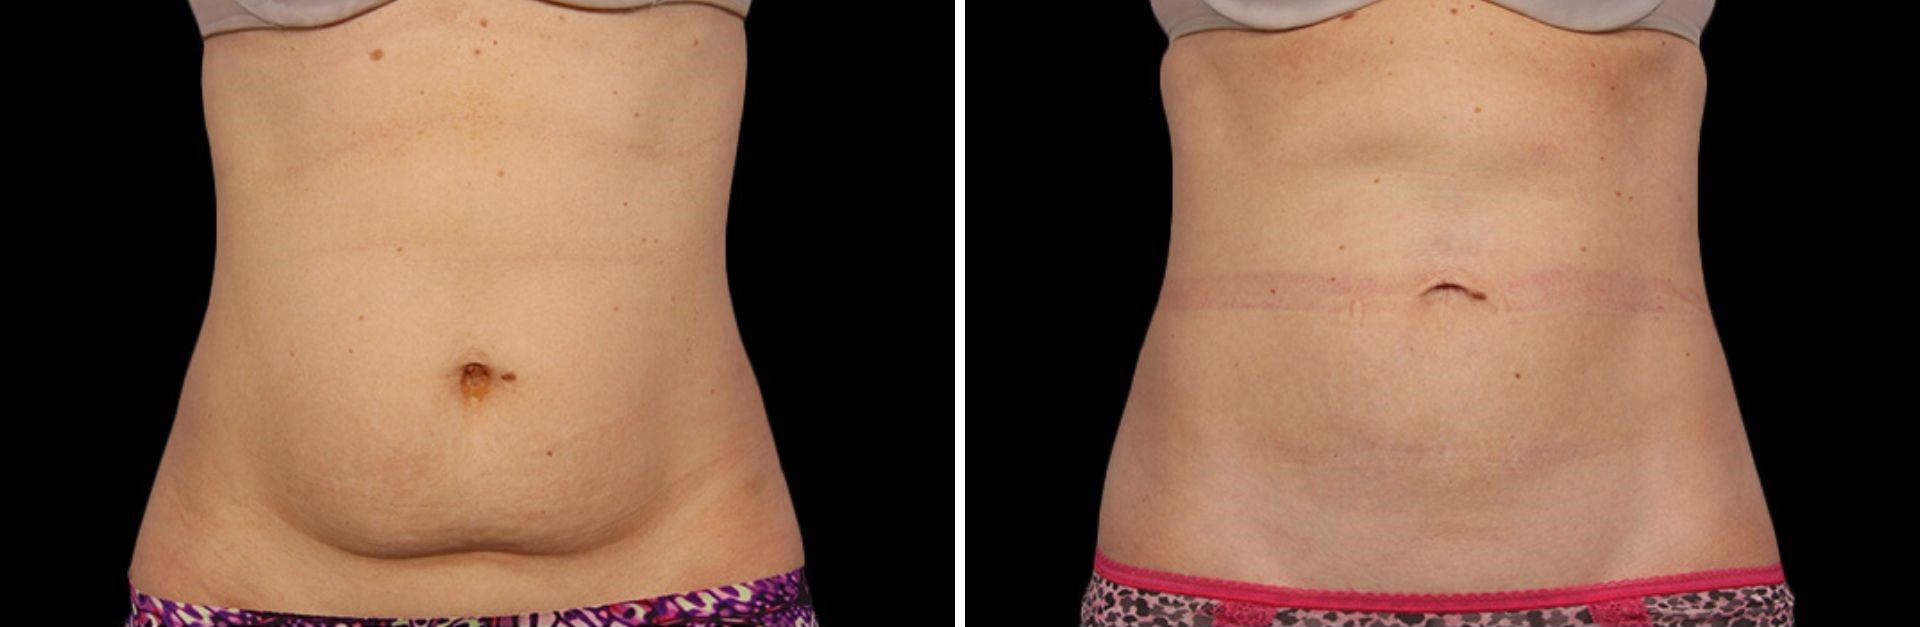 Cryolipolysis Before and After - Photos and videos